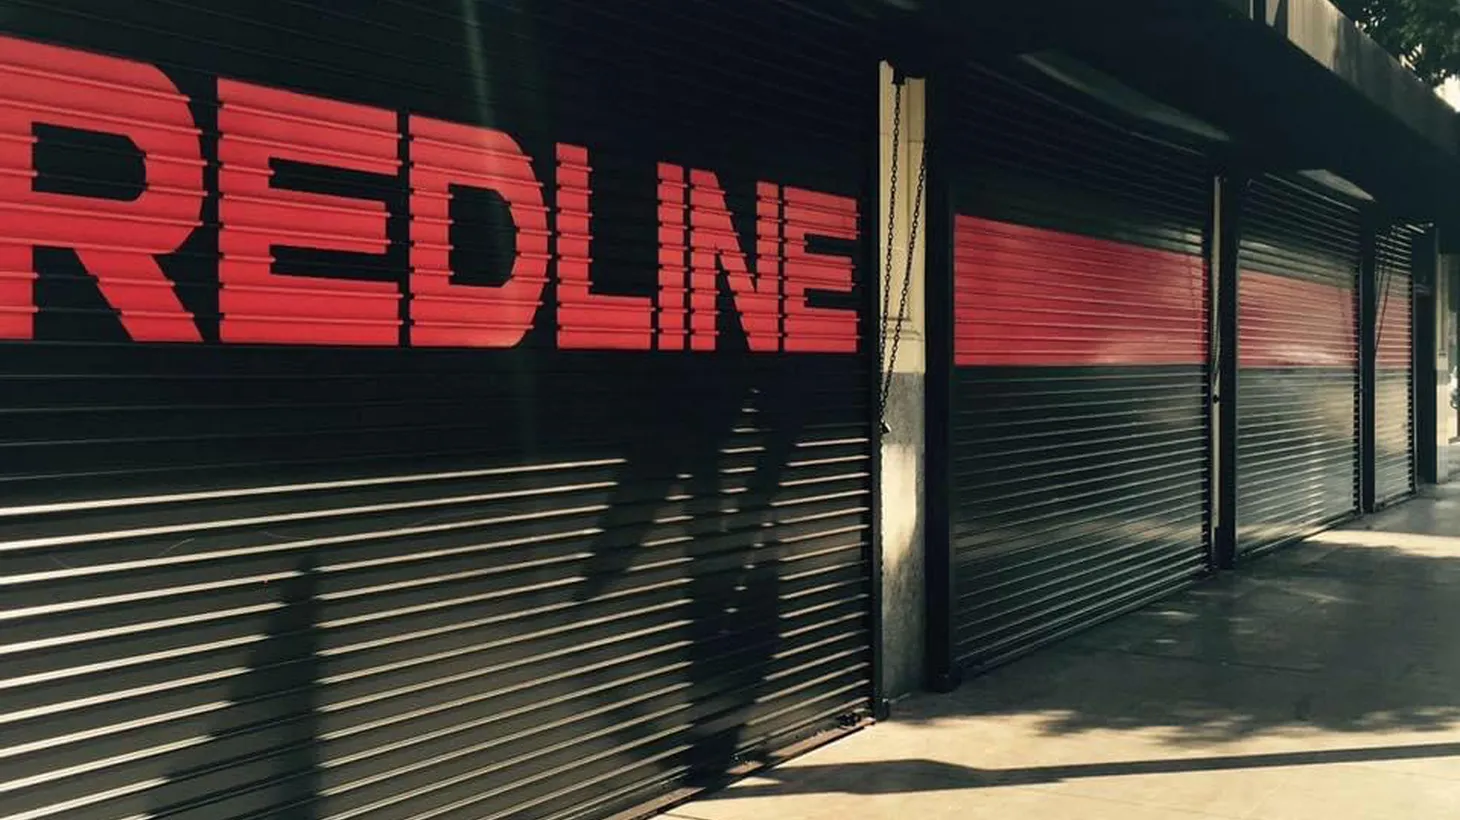 “It's bittersweet. I've heard so many lovely comments and appreciation for what Redline became. And, of course, I don't want to lose that. But it's not a goodbye, it’s [an] ‘I'll see you later,’” Redline owner Oliver Alpuche says about the bar’s closure.